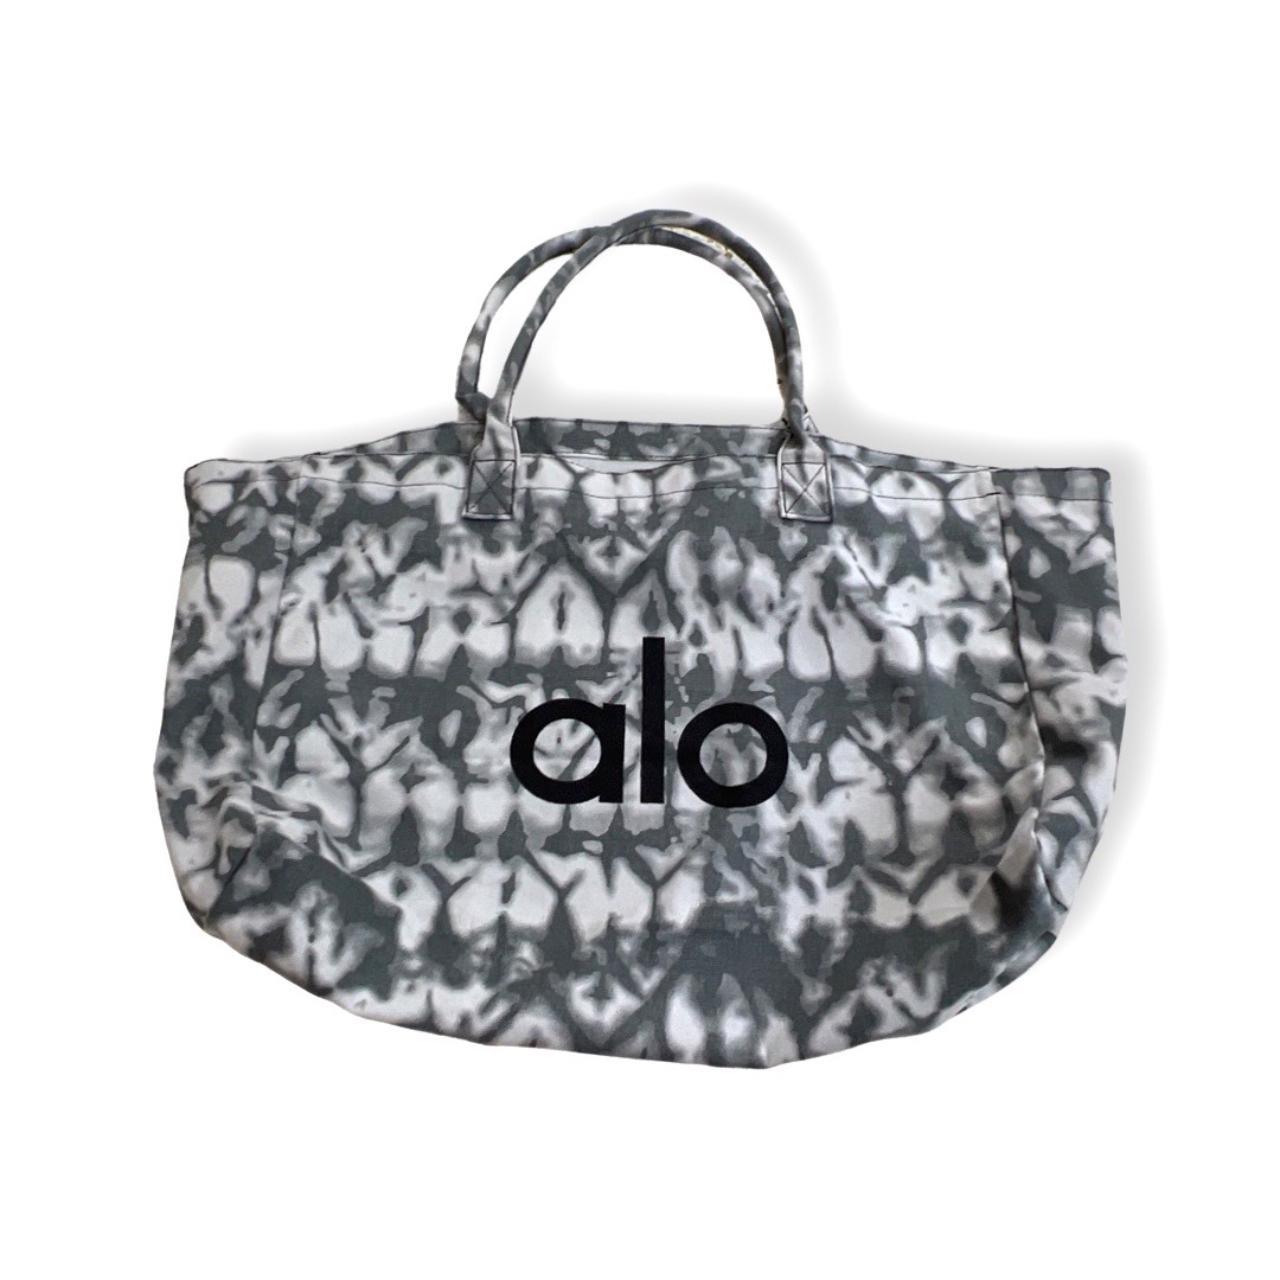 Alo Yoga Gray Tie-Dye Shopper Tote Bag - New with France